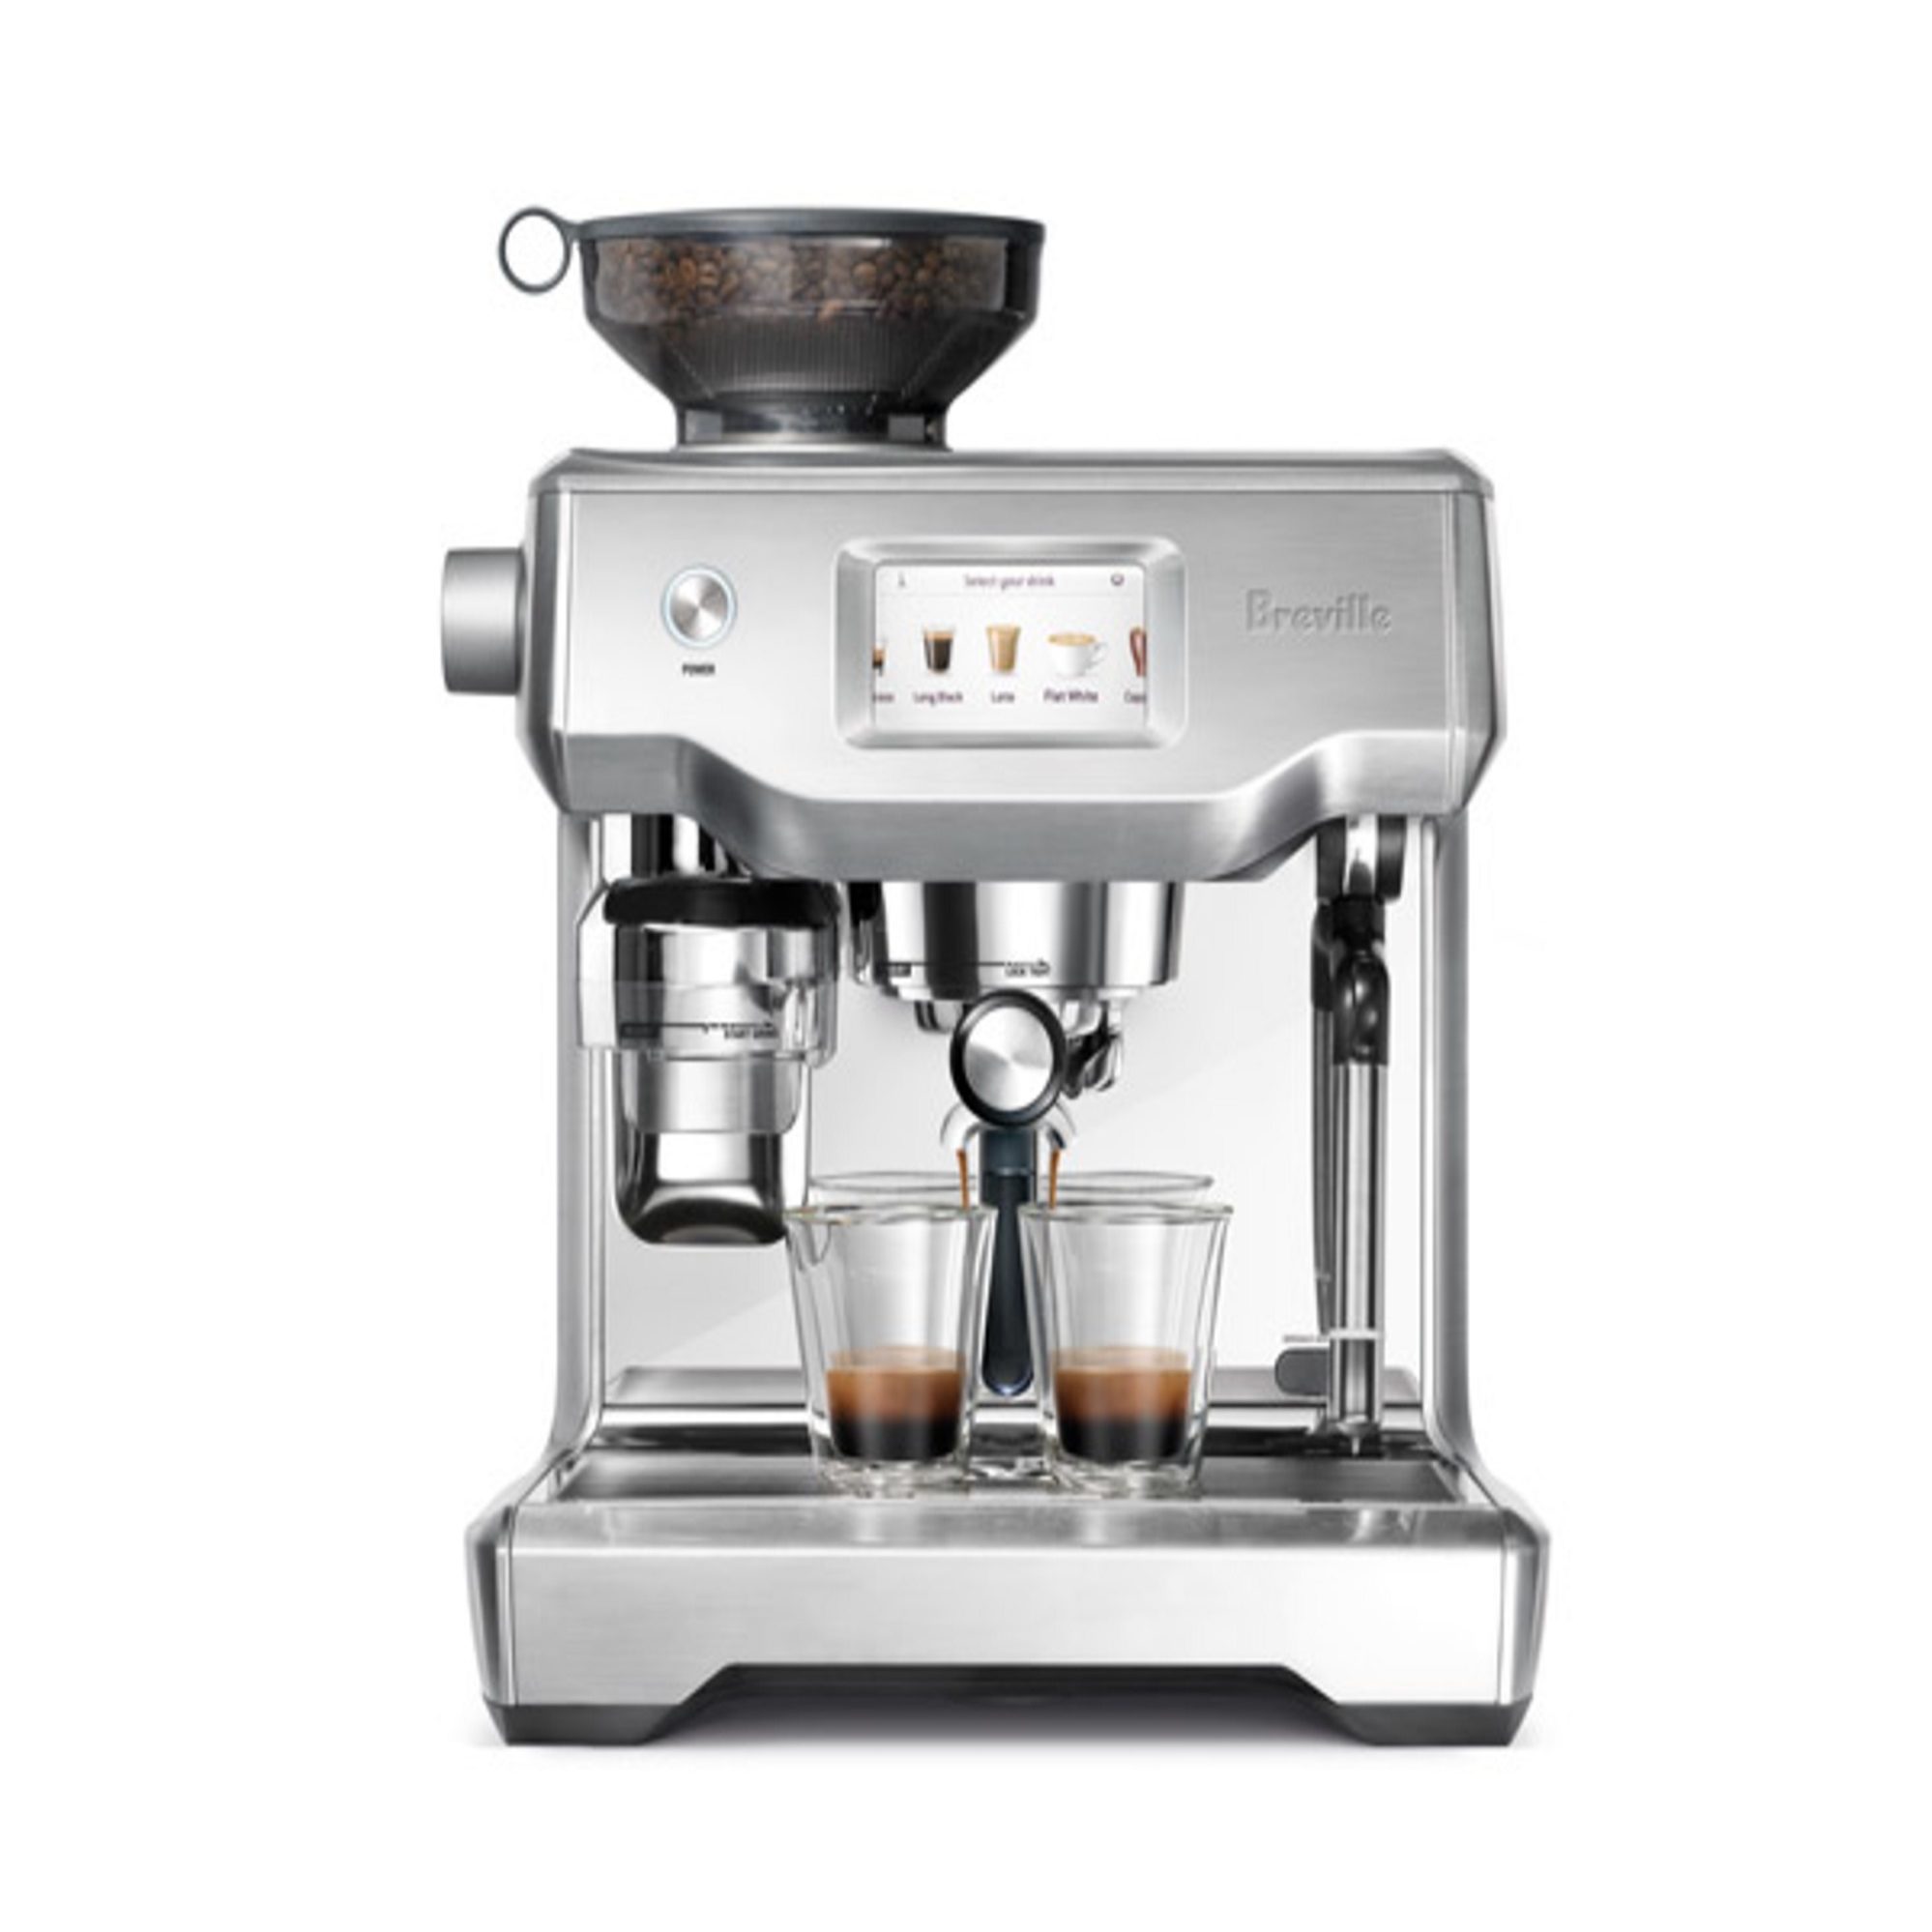 Breville The Oracle Touch espresso coffee machine in a sleek brushed and polished stainless steel finish pouring two cups simultaneously integral coffee bean grinder